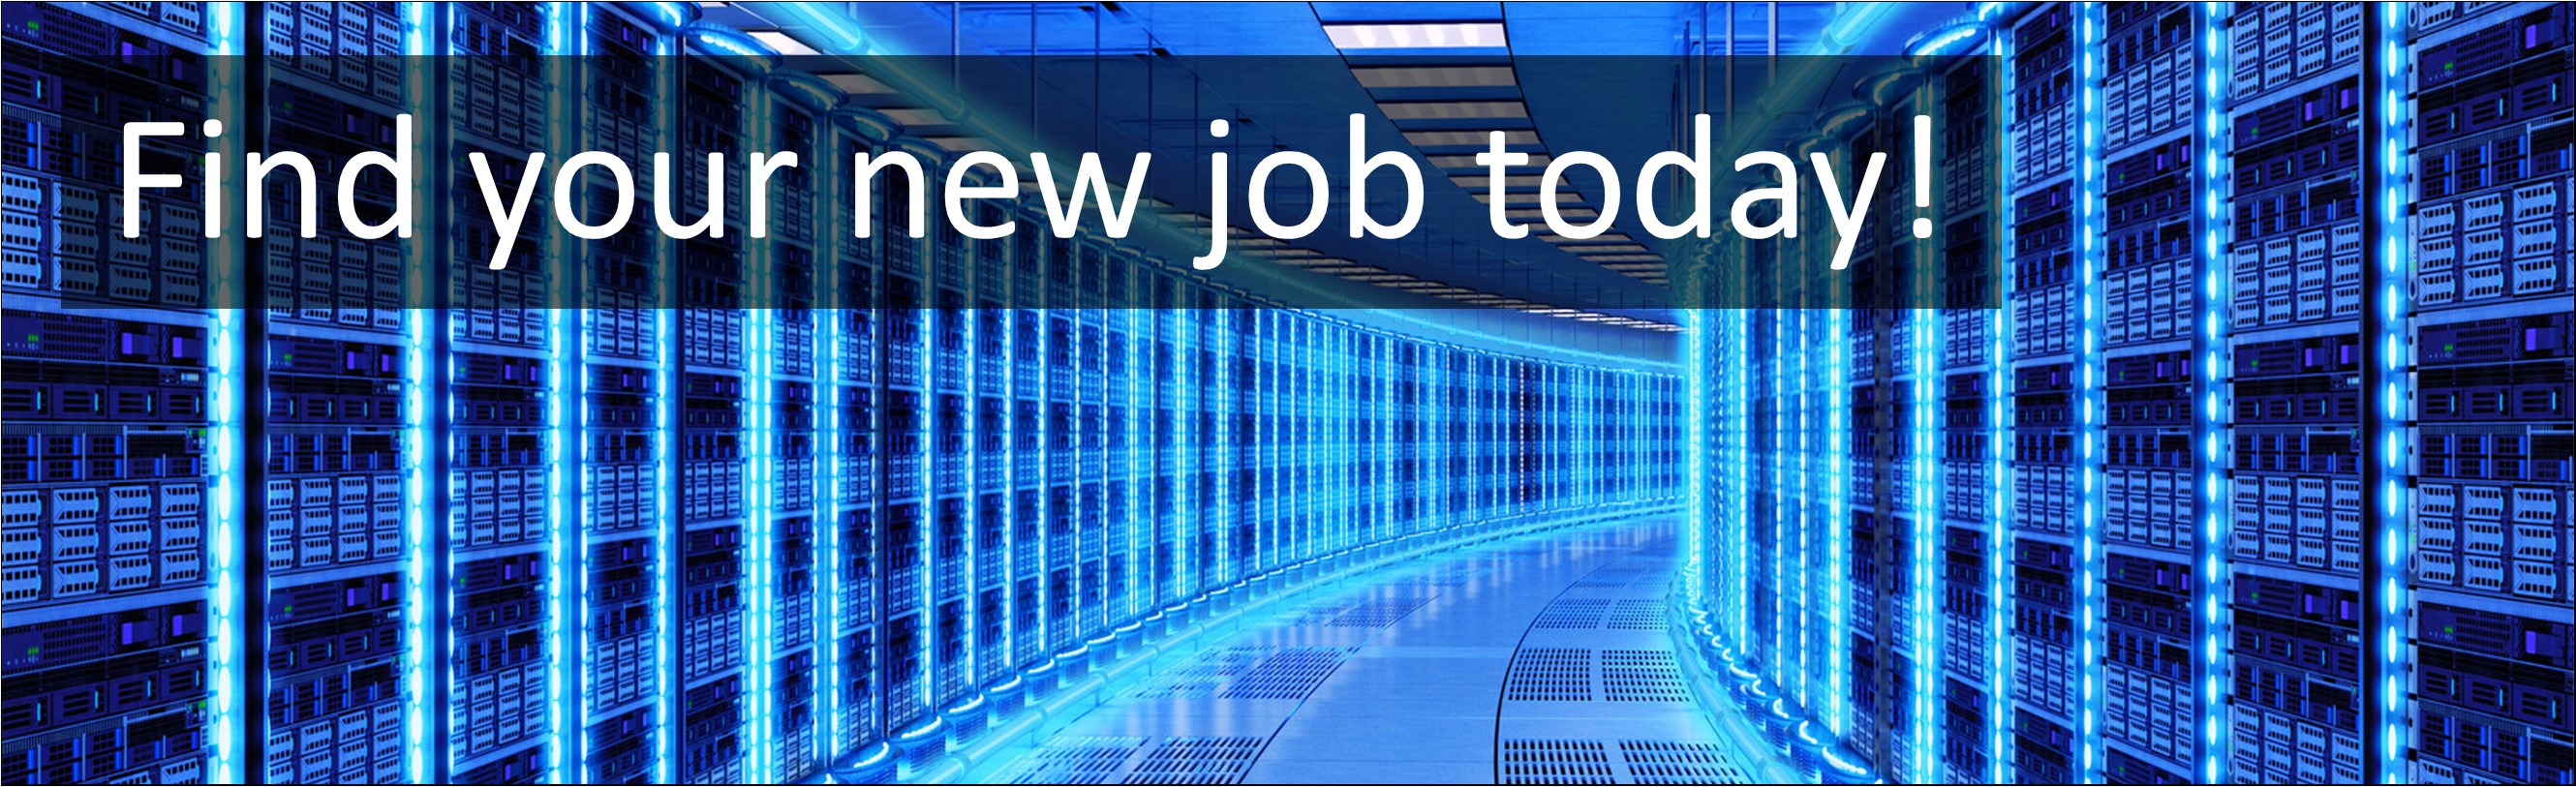 IT & Communication Jobs. IT Support Technician / First and Second Line Support Engineer Jobs, Careers & Vacancies in Sywell, Northamptonshire, East Midlands Advertised by AWD online – Multi-Job Board Advertising and CV Sourcing Recruitment Services